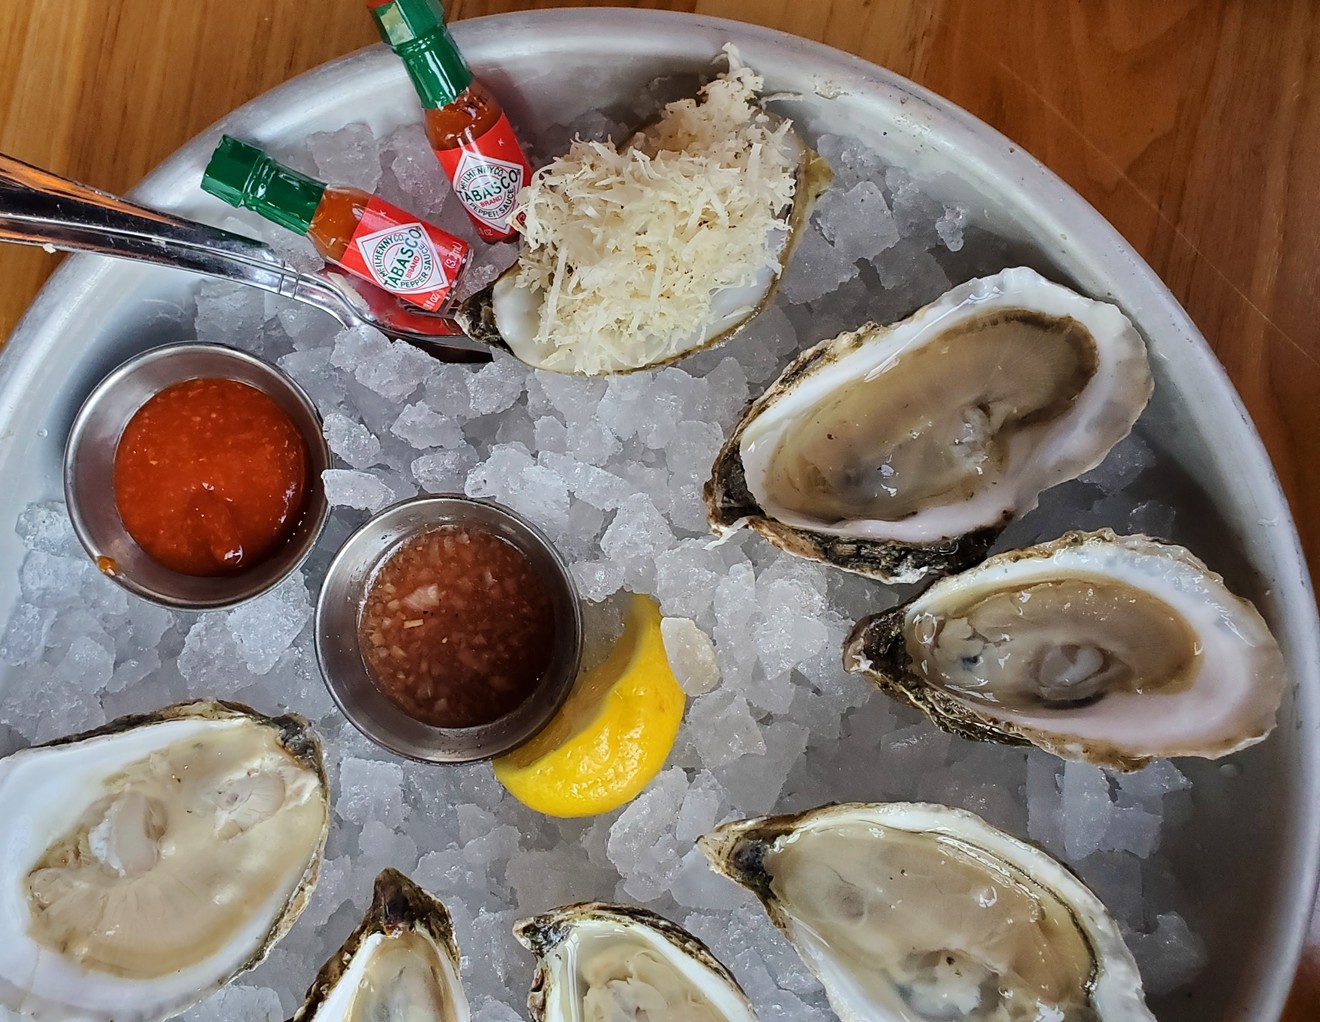 Thanks our proximity to the airport, Denver has easy access to fresh oysters.